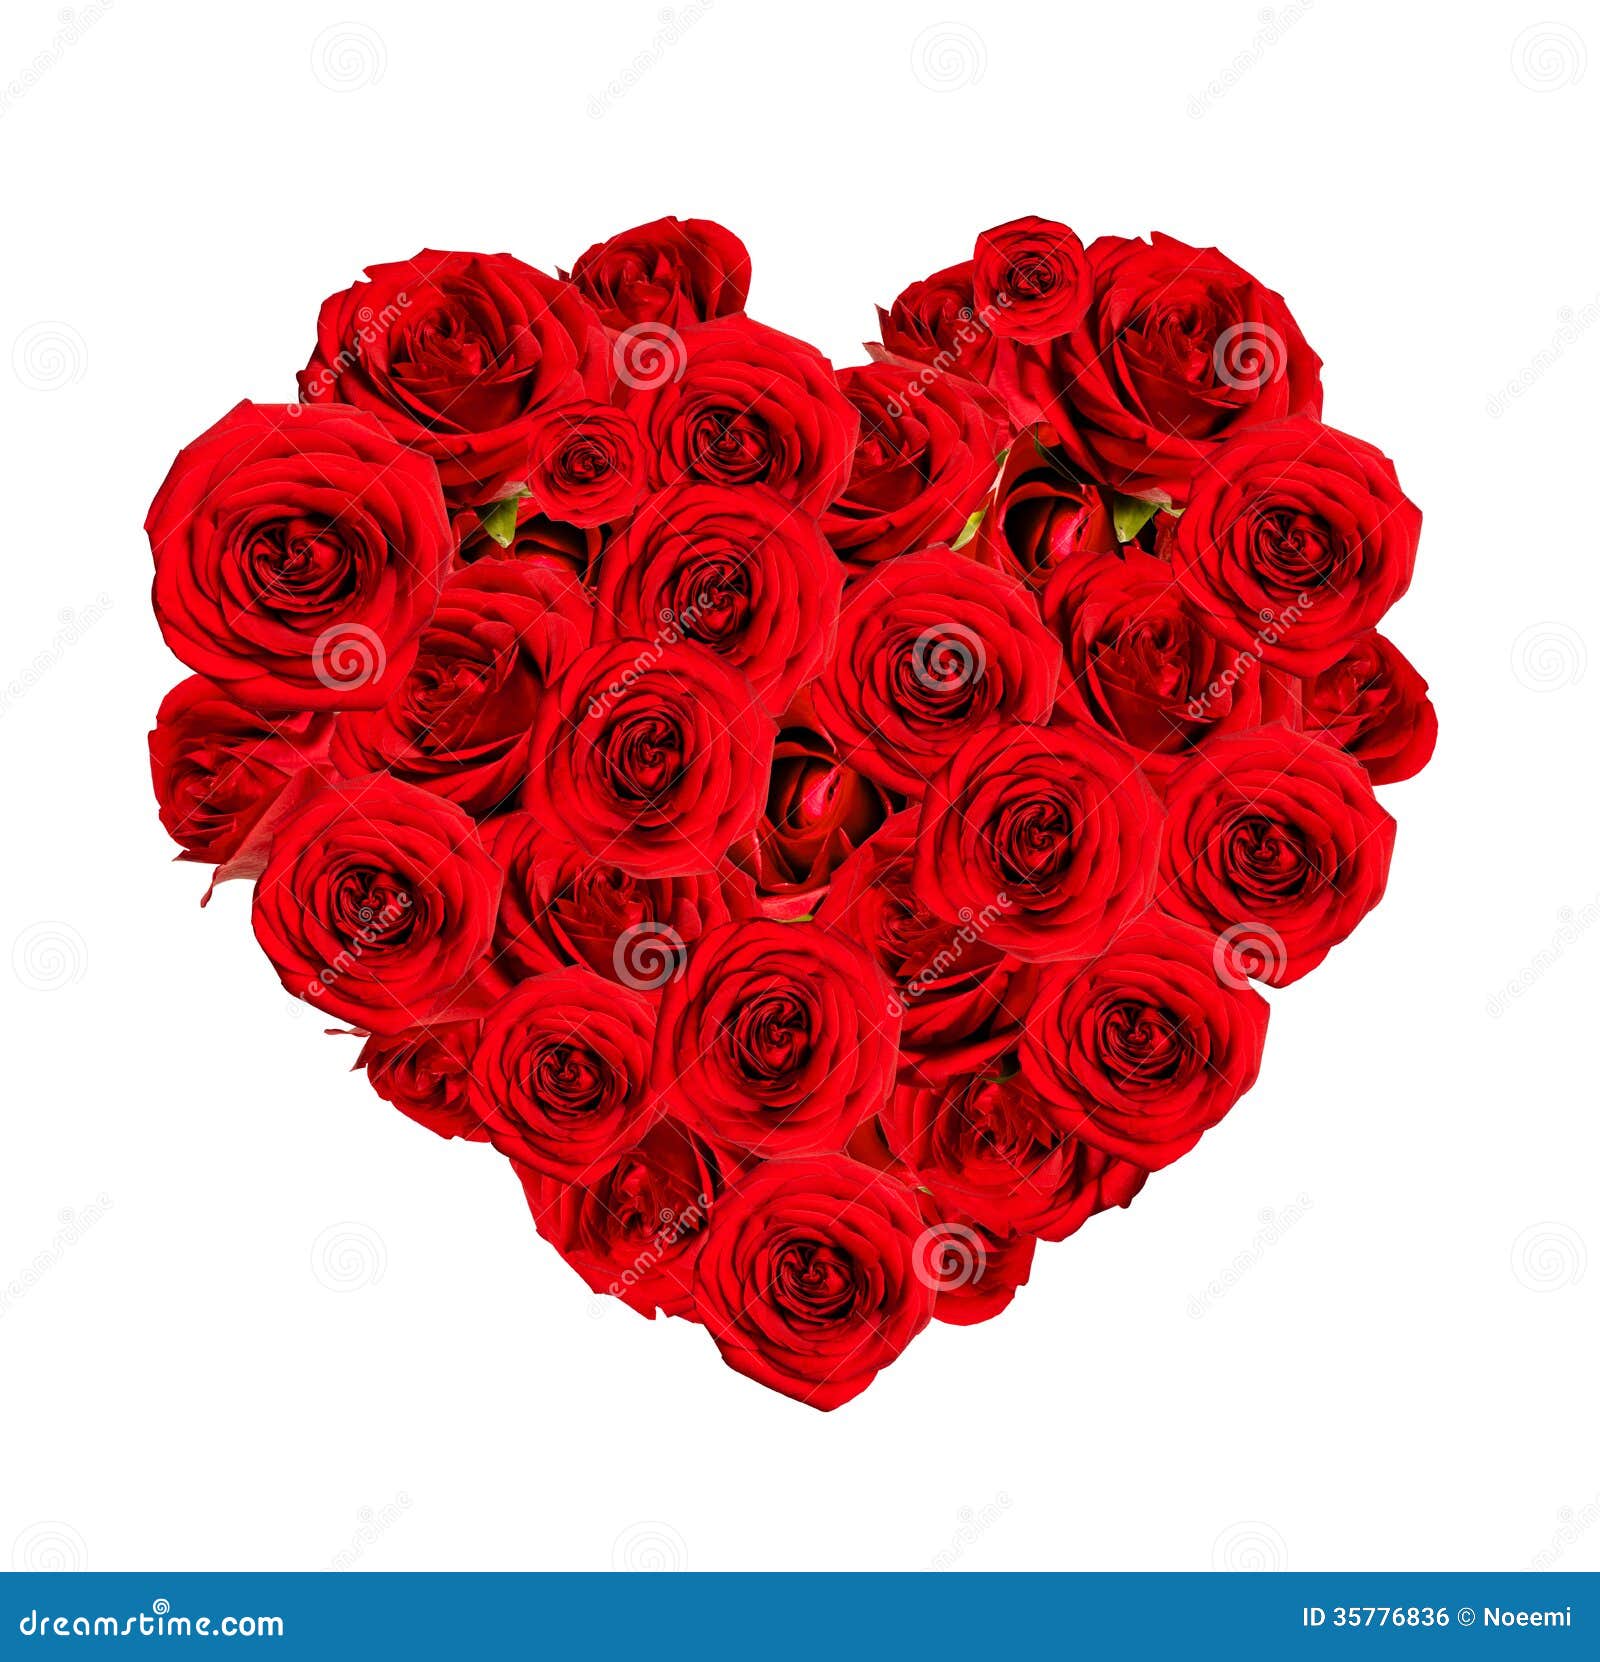 Beautiful Heart Made of Red Roses Stock Photo - Image of ...